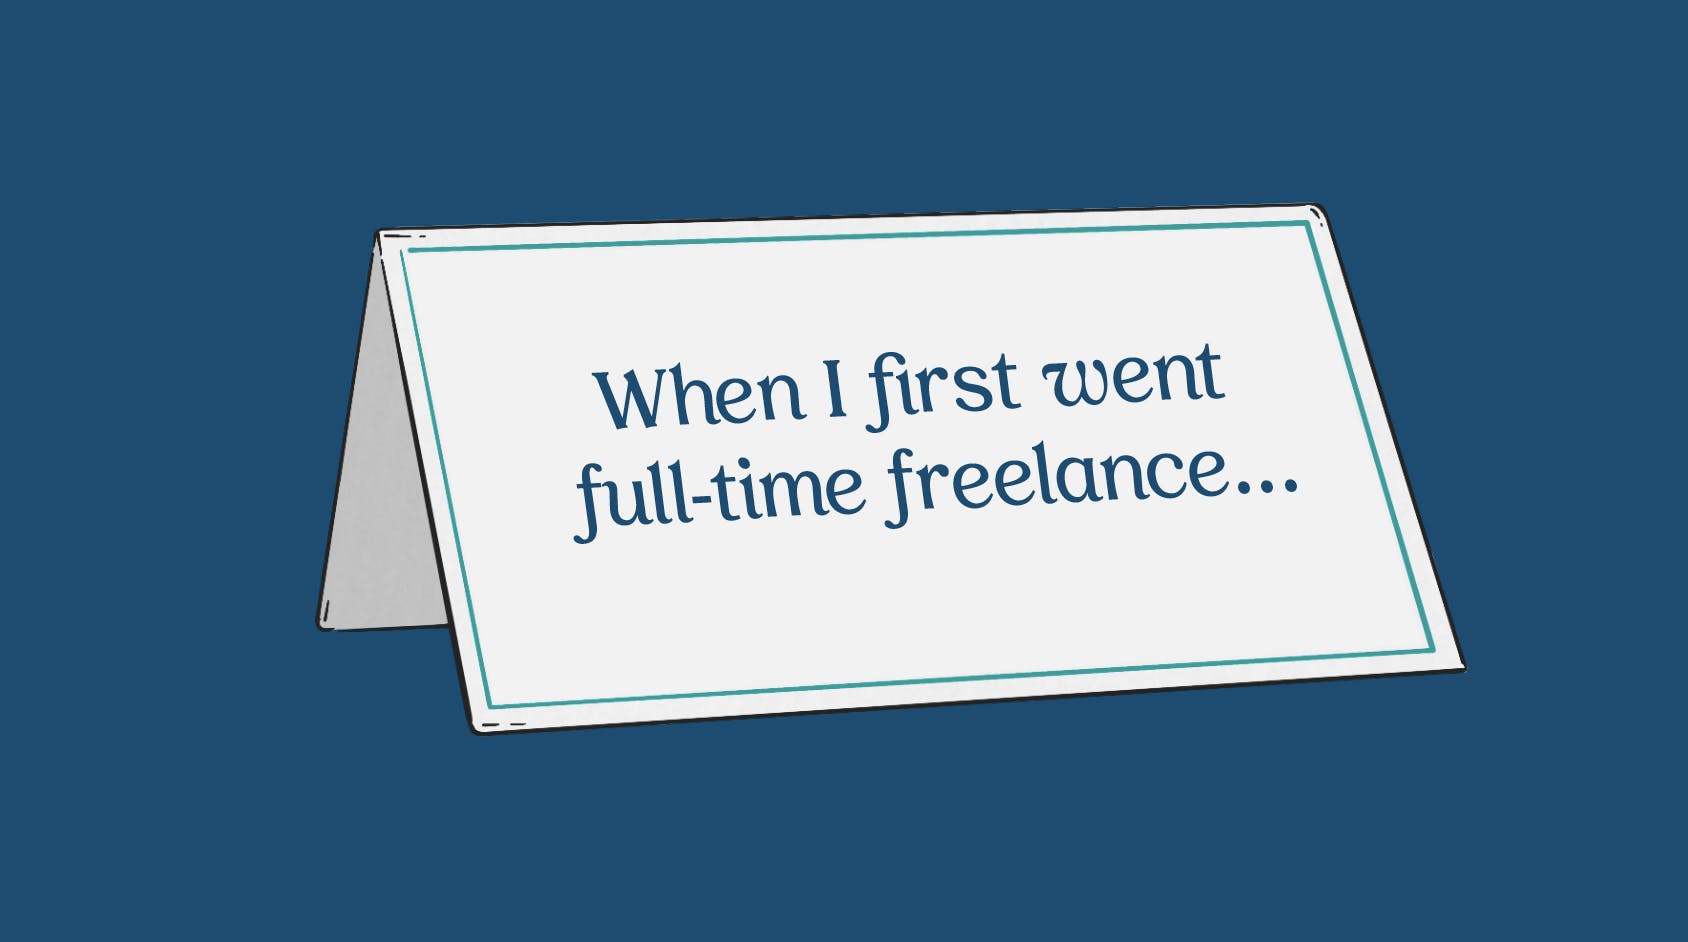 "When I first went full-time freelance"  on a placecard